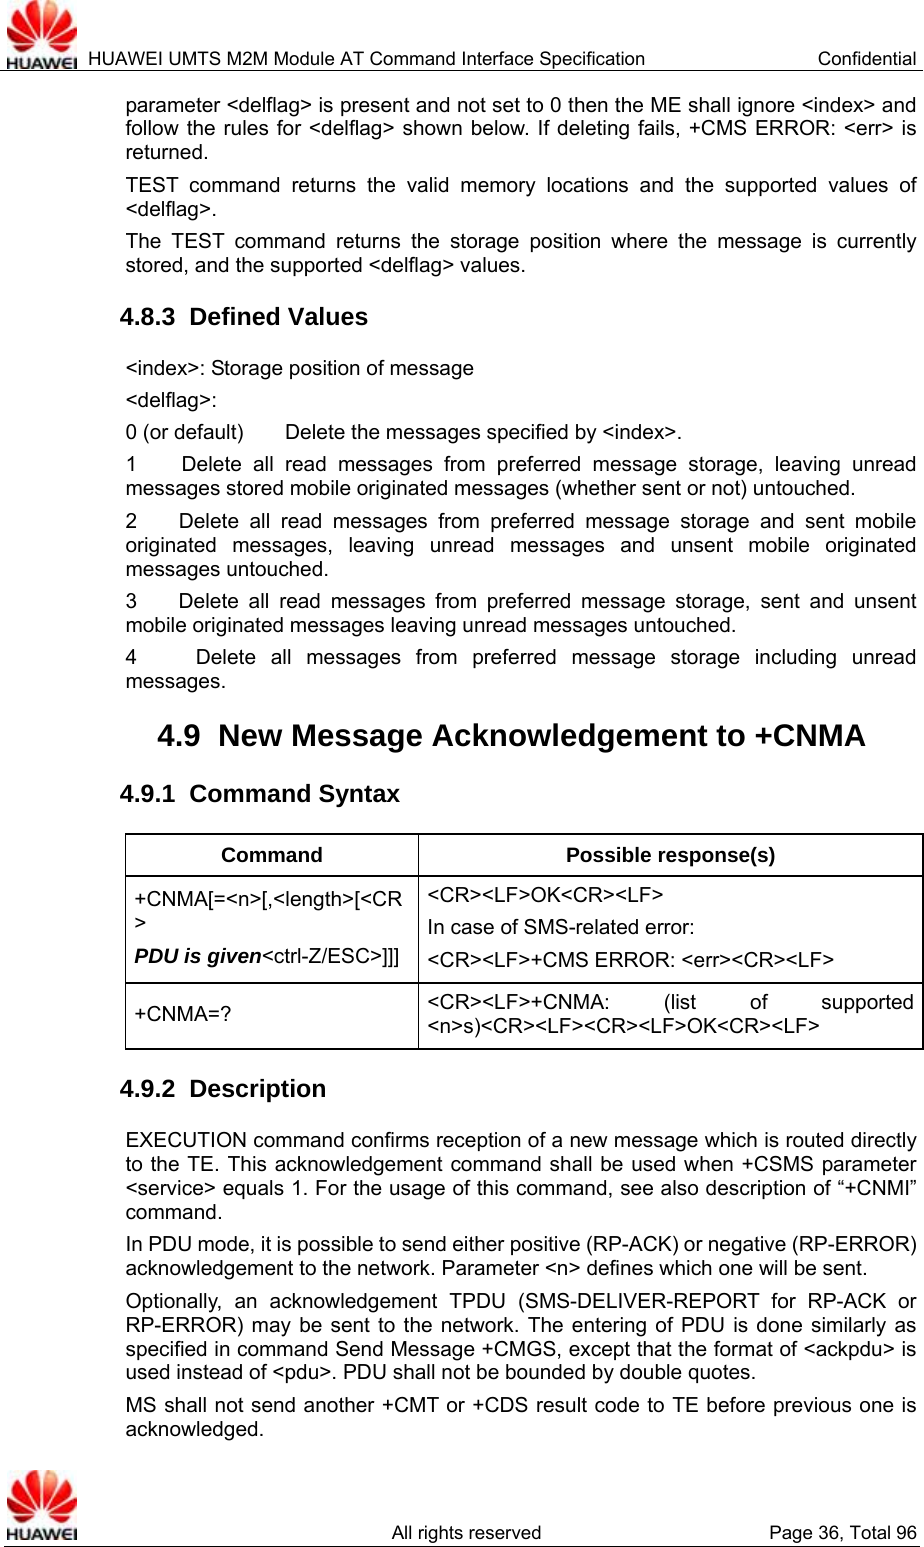  HUAWEI UMTS M2M Module AT Command Interface Specification  Confidential   All rights reserved  Page 36, Total 96 parameter &lt;delflag&gt; is present and not set to 0 then the ME shall ignore &lt;index&gt; and follow the rules for &lt;delflag&gt; shown below. If deleting fails, +CMS ERROR: &lt;err&gt; is returned. TEST command returns the valid memory locations and the supported values of &lt;delflag&gt;. The TEST command returns the storage position where the message is currently stored, and the supported &lt;delflag&gt; values.   4.8.3  Defined Values &lt;index&gt;: Storage position of message &lt;delflag&gt;:  0 (or default)    Delete the messages specified by &lt;index&gt;.   1    Delete all read messages from preferred message storage, leaving unread messages stored mobile originated messages (whether sent or not) untouched. 2    Delete all read messages from preferred message storage and sent mobile originated messages, leaving unread messages and unsent mobile originated messages untouched. 3    Delete all read messages from preferred message storage, sent and unsent mobile originated messages leaving unread messages untouched. 4    Delete all messages from preferred message storage including unread messages. 4.9  New Message Acknowledgement to +CNMA 4.9.1  Command Syntax Command Possible response(s) +CNMA[=&lt;n&gt;[,&lt;length&gt;[&lt;CR&gt; PDU is given&lt;ctrl-Z/ESC&gt;]]]&lt;CR&gt;&lt;LF&gt;OK&lt;CR&gt;&lt;LF&gt; In case of SMS-related error:   &lt;CR&gt;&lt;LF&gt;+CMS ERROR: &lt;err&gt;&lt;CR&gt;&lt;LF&gt; +CNMA=?  &lt;CR&gt;&lt;LF&gt;+CNMA: (list of supported &lt;n&gt;s)&lt;CR&gt;&lt;LF&gt;&lt;CR&gt;&lt;LF&gt;OK&lt;CR&gt;&lt;LF&gt; 4.9.2  Description EXECUTION command confirms reception of a new message which is routed directly to the TE. This acknowledgement command shall be used when +CSMS parameter &lt;service&gt; equals 1. For the usage of this command, see also description of “+CNMI” command.  In PDU mode, it is possible to send either positive (RP-ACK) or negative (RP-ERROR) acknowledgement to the network. Parameter &lt;n&gt; defines which one will be sent. Optionally, an acknowledgement TPDU (SMS-DELIVER-REPORT for RP-ACK or RP-ERROR) may be sent to the network. The entering of PDU is done similarly as specified in command Send Message +CMGS, except that the format of &lt;ackpdu&gt; is used instead of &lt;pdu&gt;. PDU shall not be bounded by double quotes. MS shall not send another +CMT or +CDS result code to TE before previous one is acknowledged. 